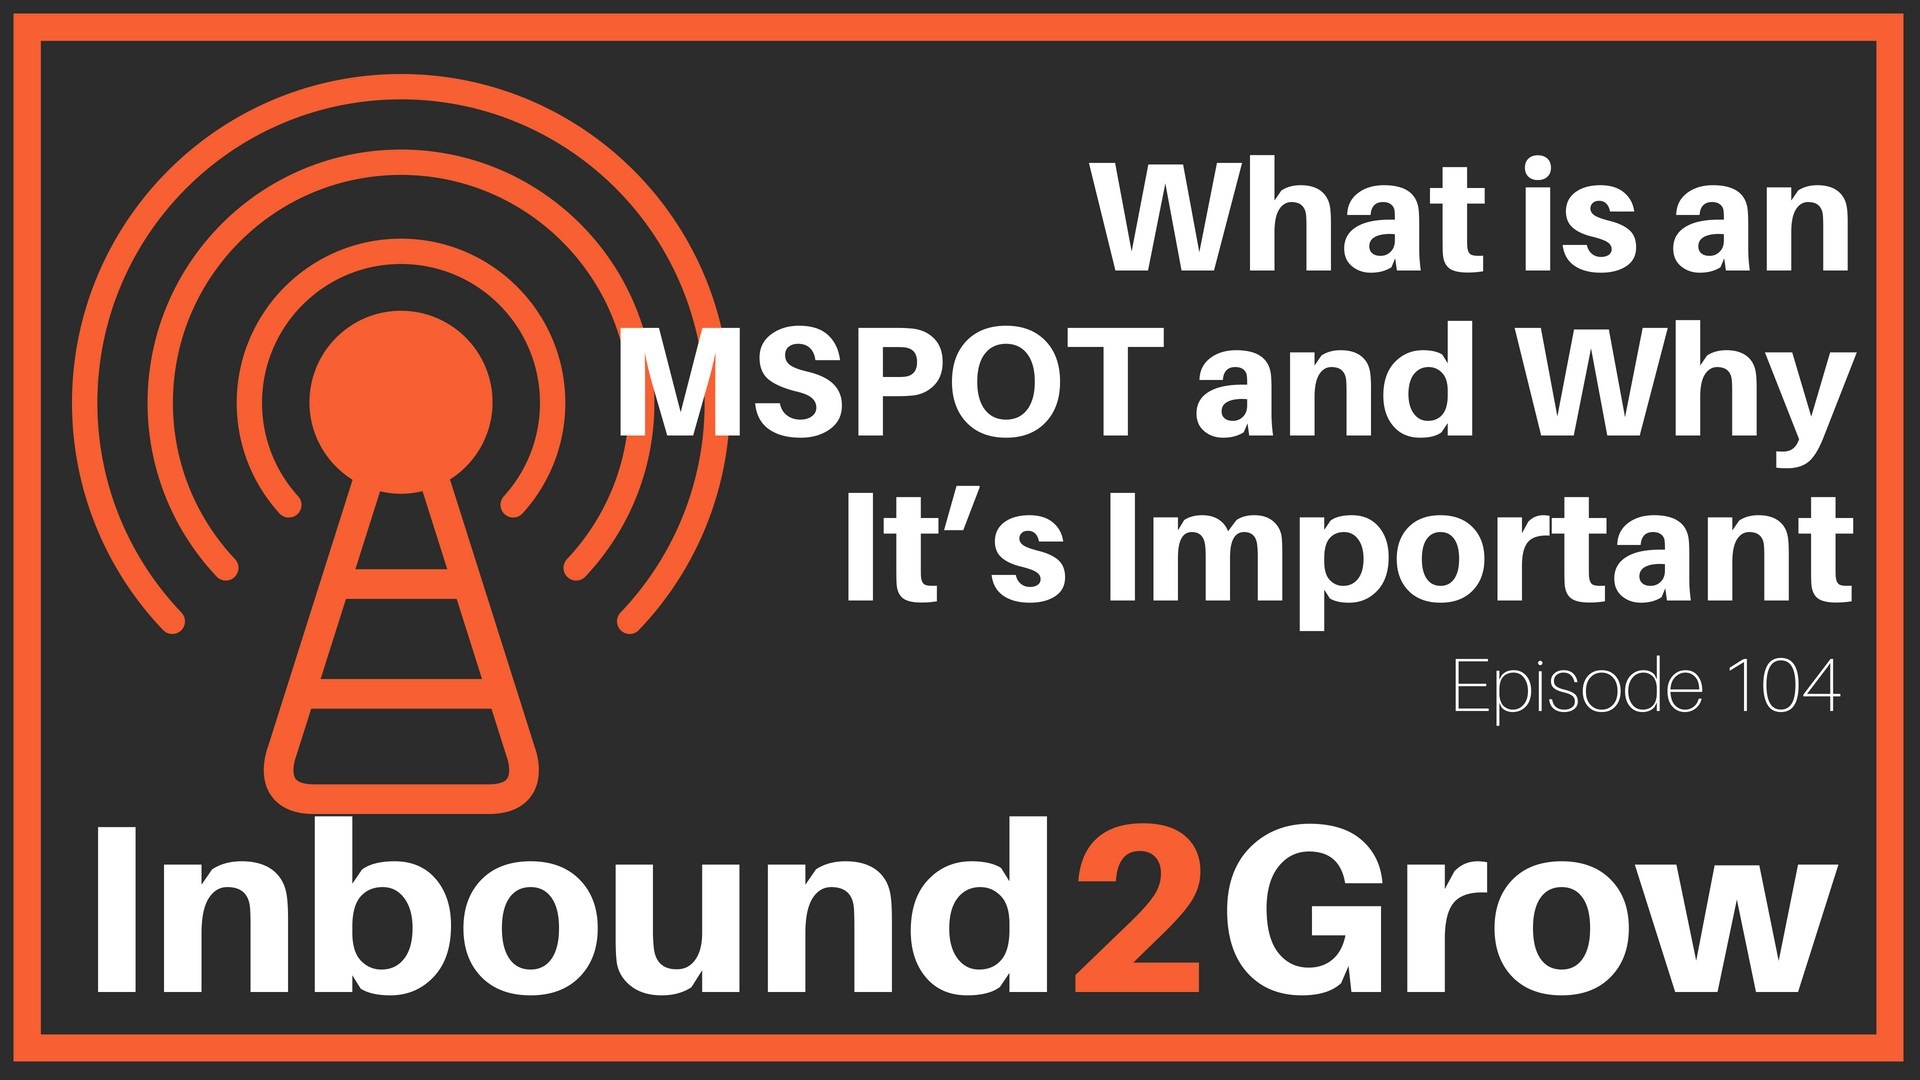 Inbound2Grow Episode 104: What is an MSPOT and Why It’s Important